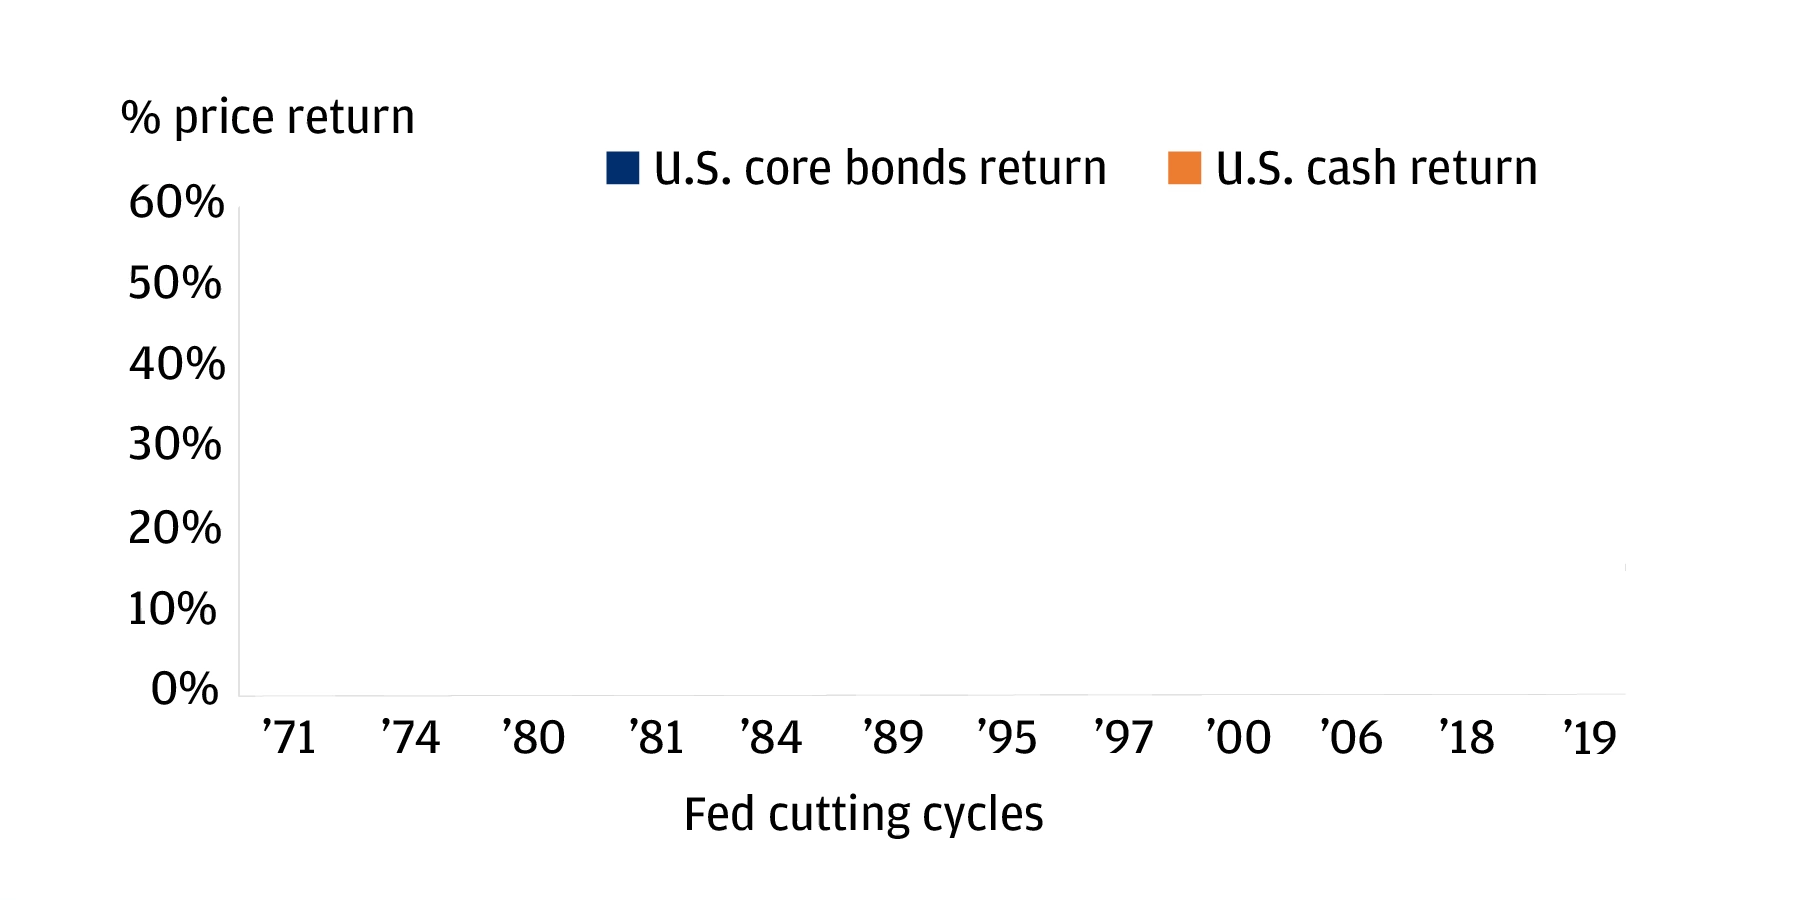 Historical bond returns (%) after the Fed's final hike chart -  This bar chart shows the U.S. core bonds and cash returns from the final Fed hike to the final Fed cut, from 1971 to 2019. In each of the twelve years shown (1971, 1974, 1980, 1981, 1984, 1989, 1995, 1997, 2000, 2006, 2018, 2019), core bonds outperformed cash returns. Returns were under 10% in 1971, trending upward as the years progressed. 1989 saw the highest returns, with over 50% for core bonds and over 25% for cash returns. Returns trended downward after this point, with some fluctuations over the years.